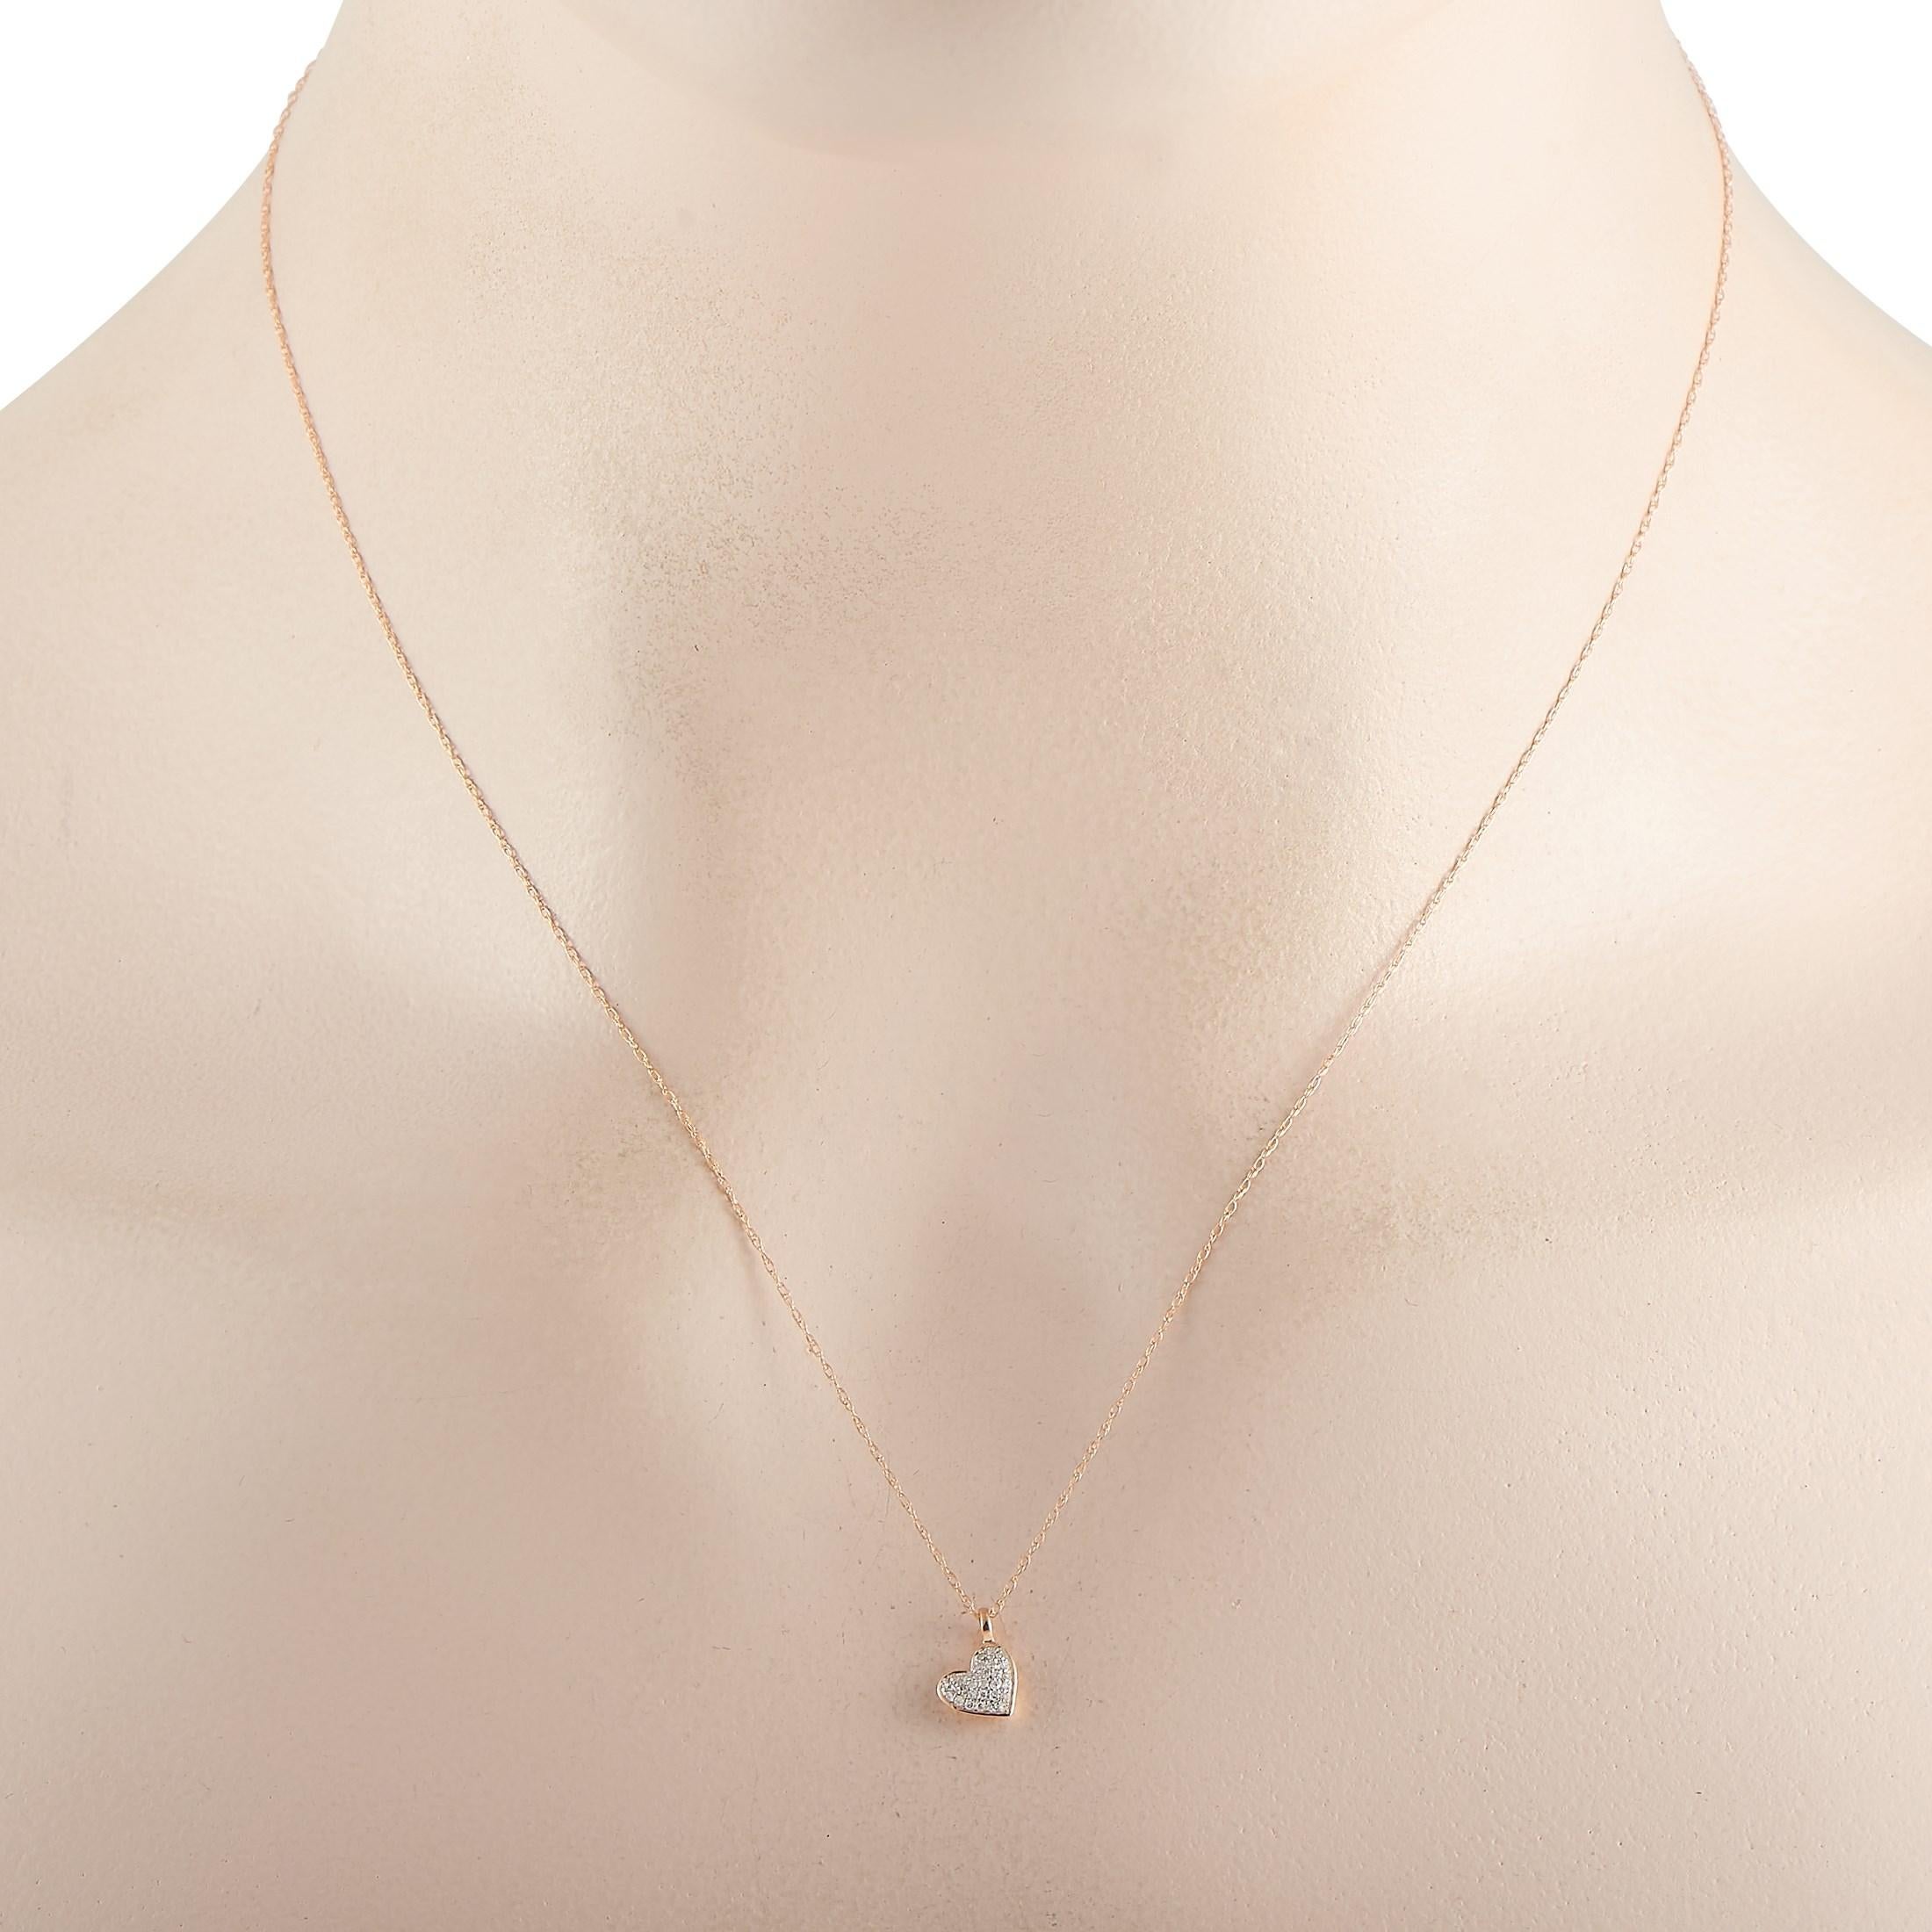 This stylish LB Exclusive 14K Rose Gold 0.80 ct Diamond Heart Pendant Necklace includes a delicate 14K Rose Gold chain that is 17 inches in length and features a spring ring closure. The necklace includes a matching rose gold heart pendant set with